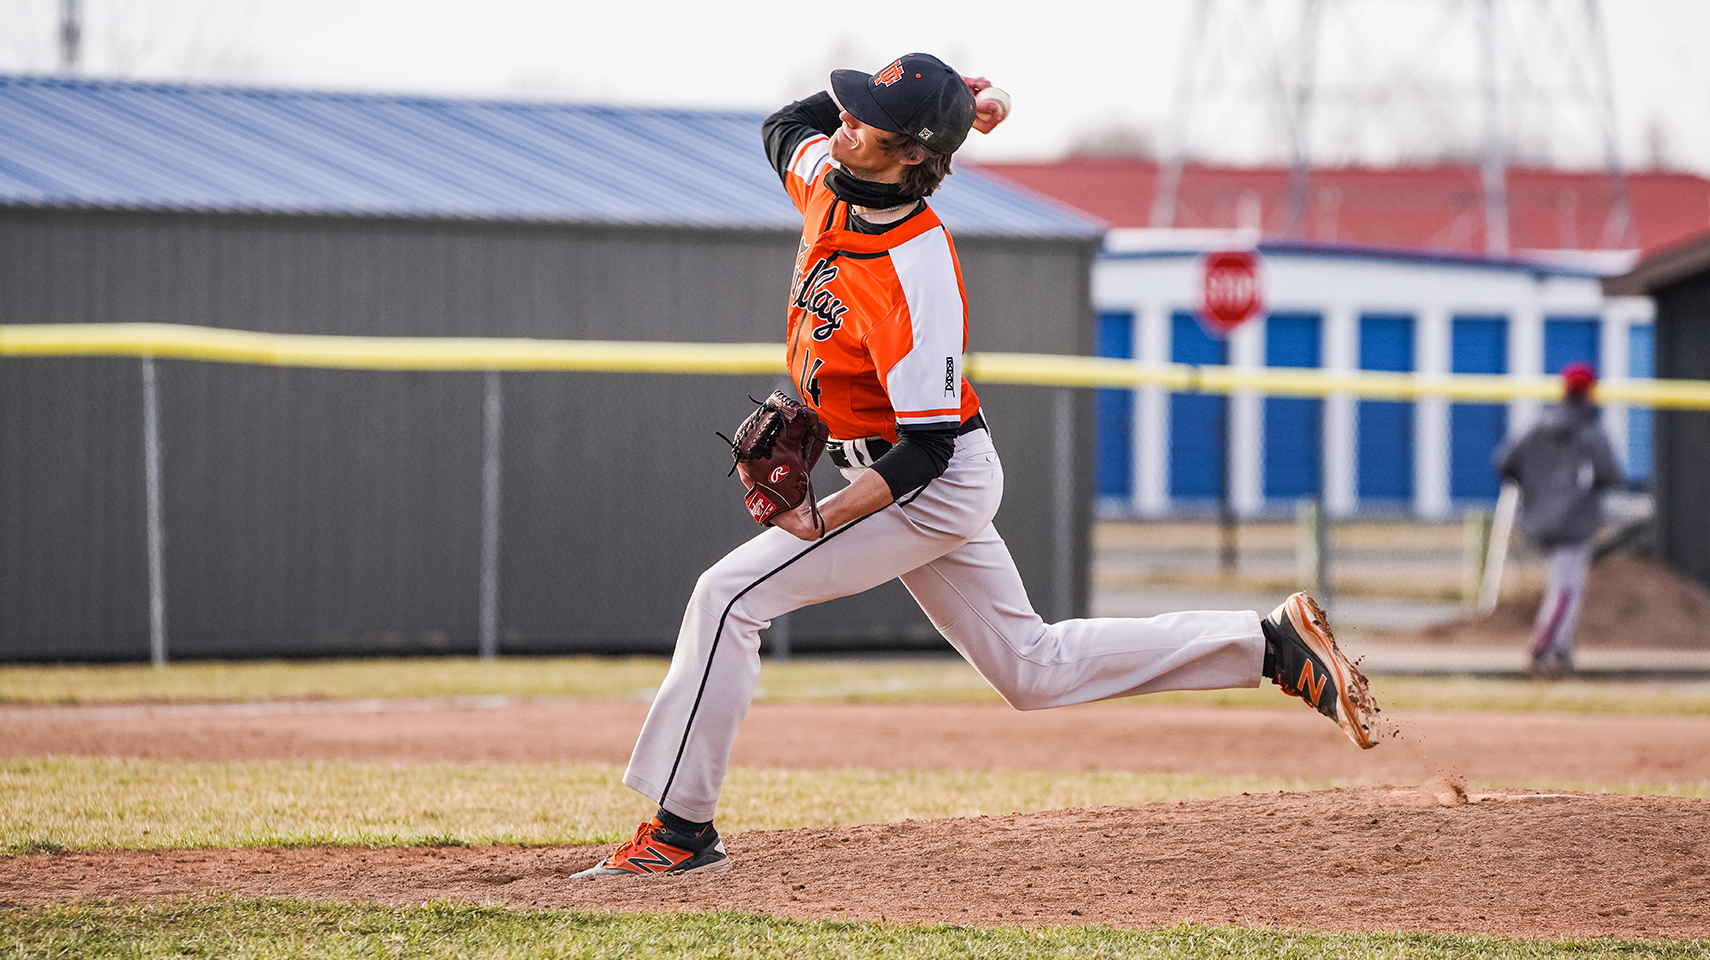 Pitcher in orange throwing the ball 